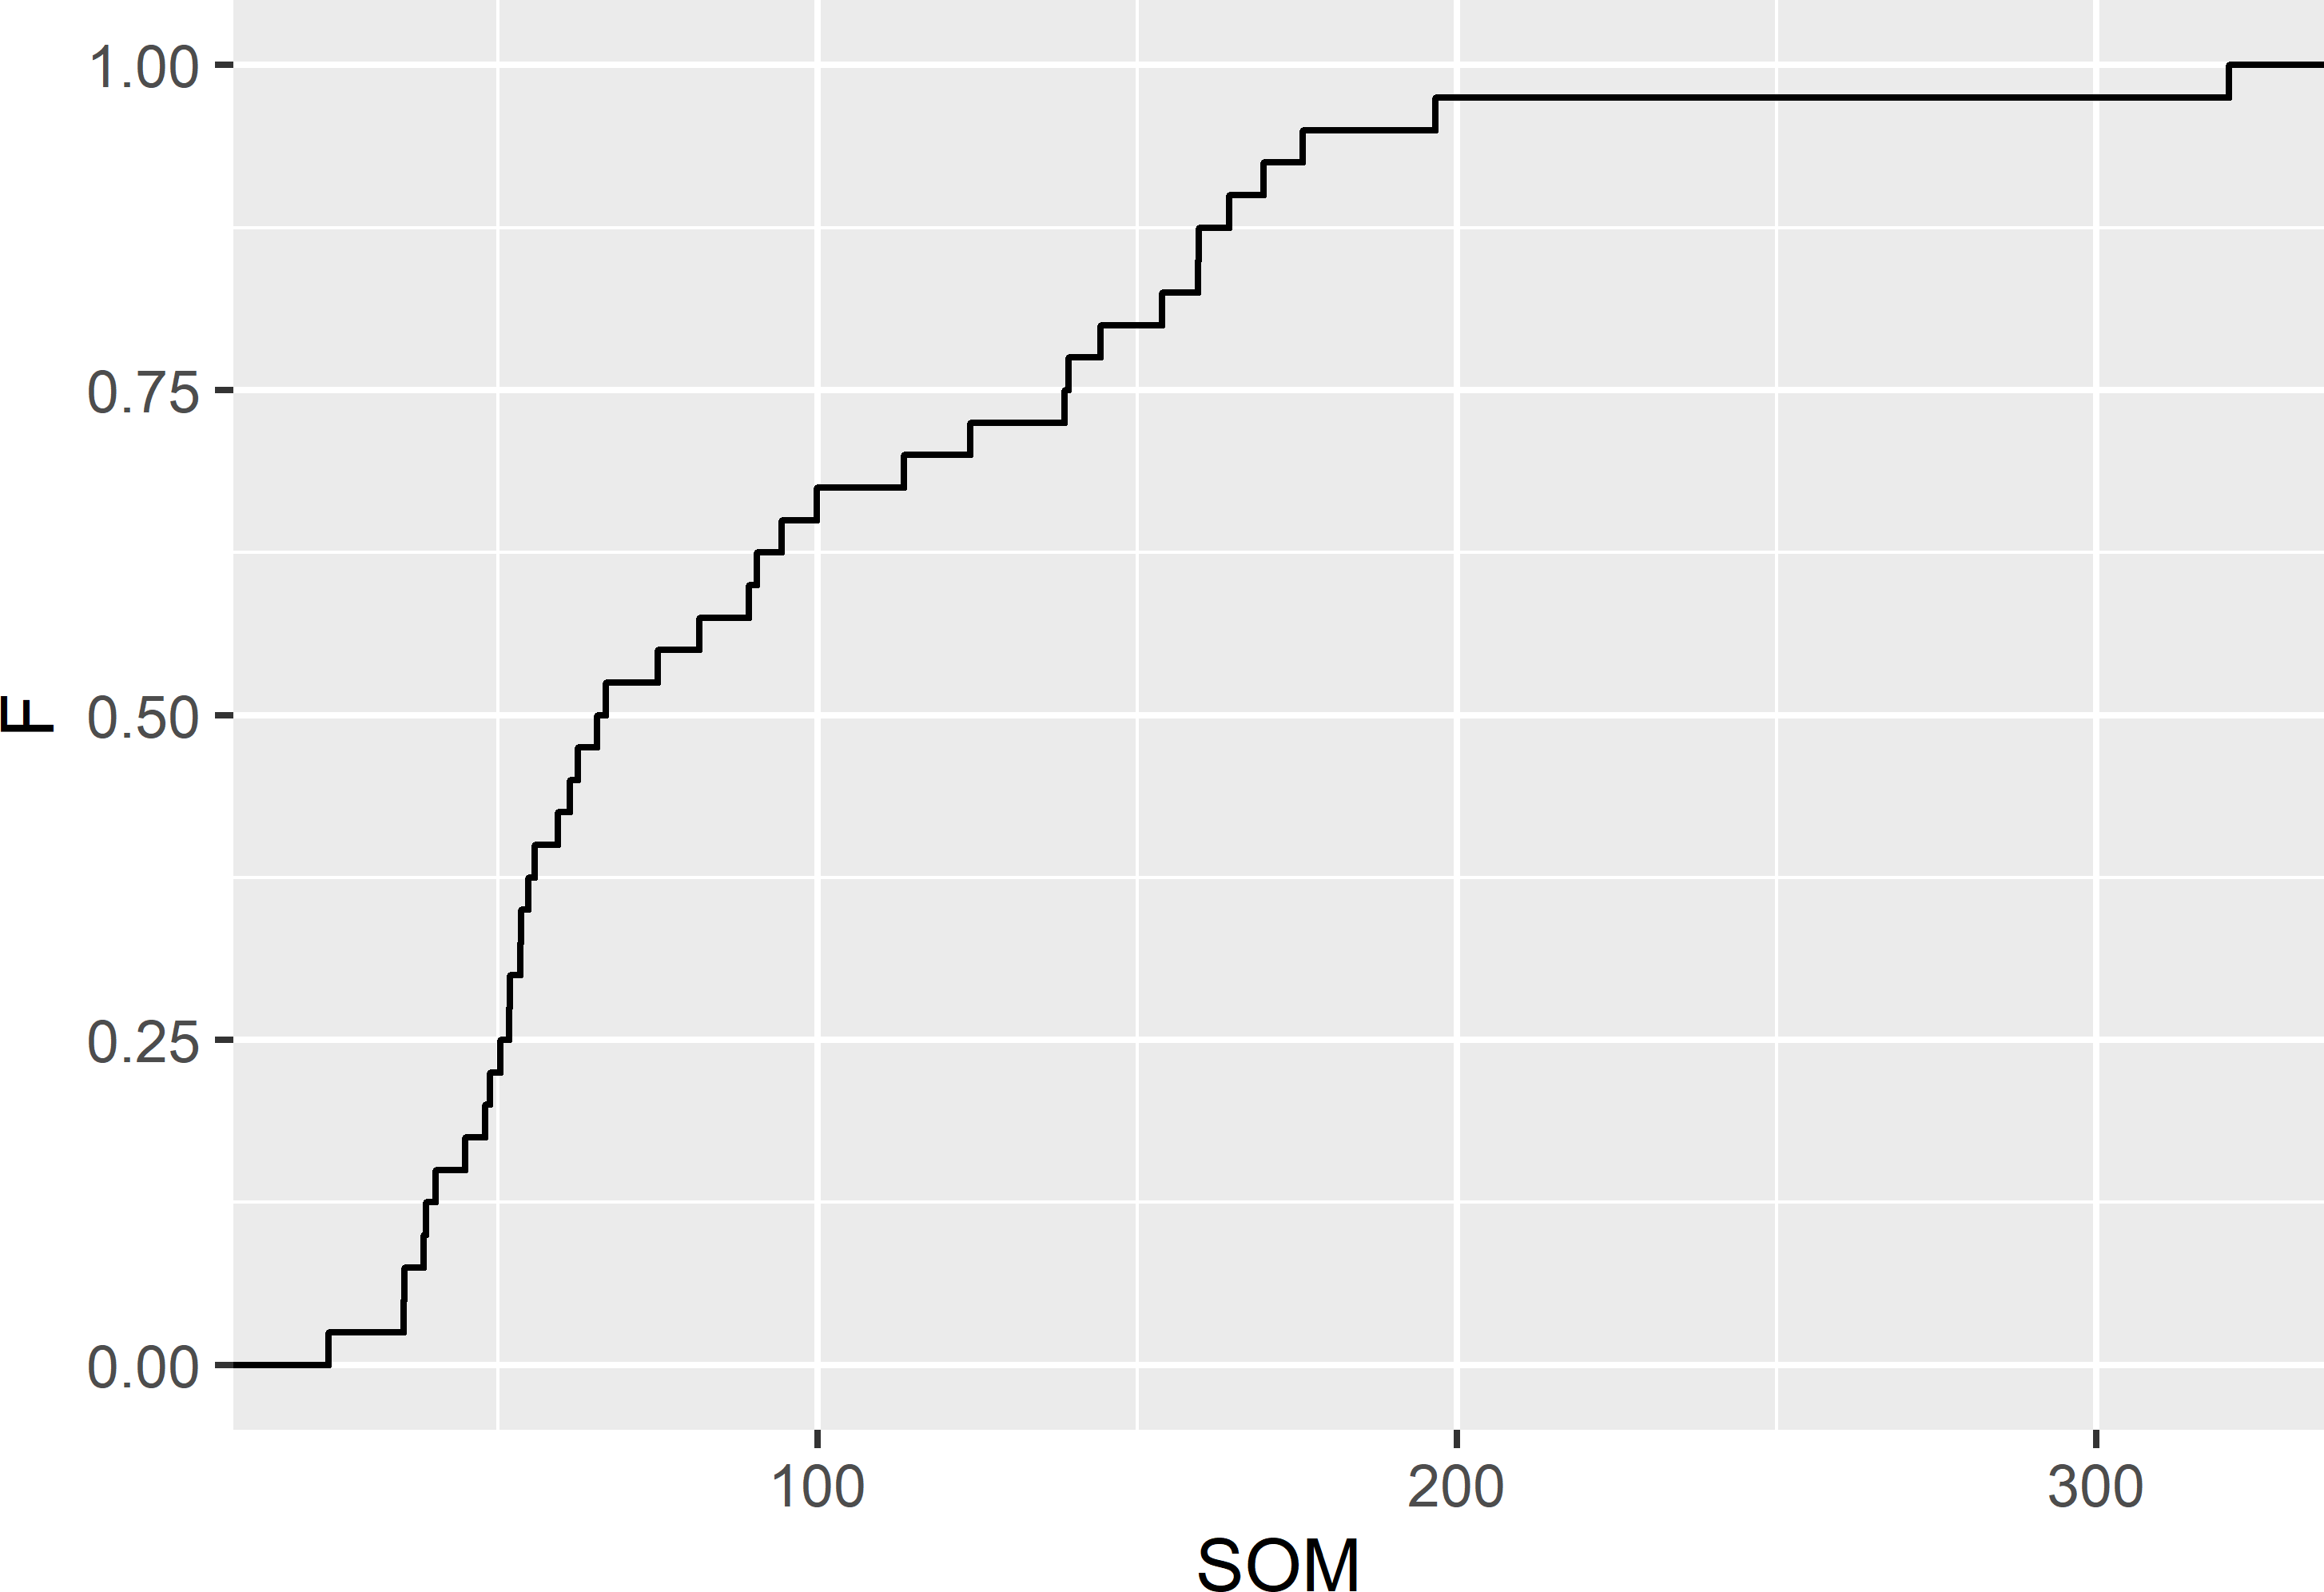 Cumulative distribution function of the SOM concentration (g kg-1) in Voorst, estimated from the simple random sample of 40 units.